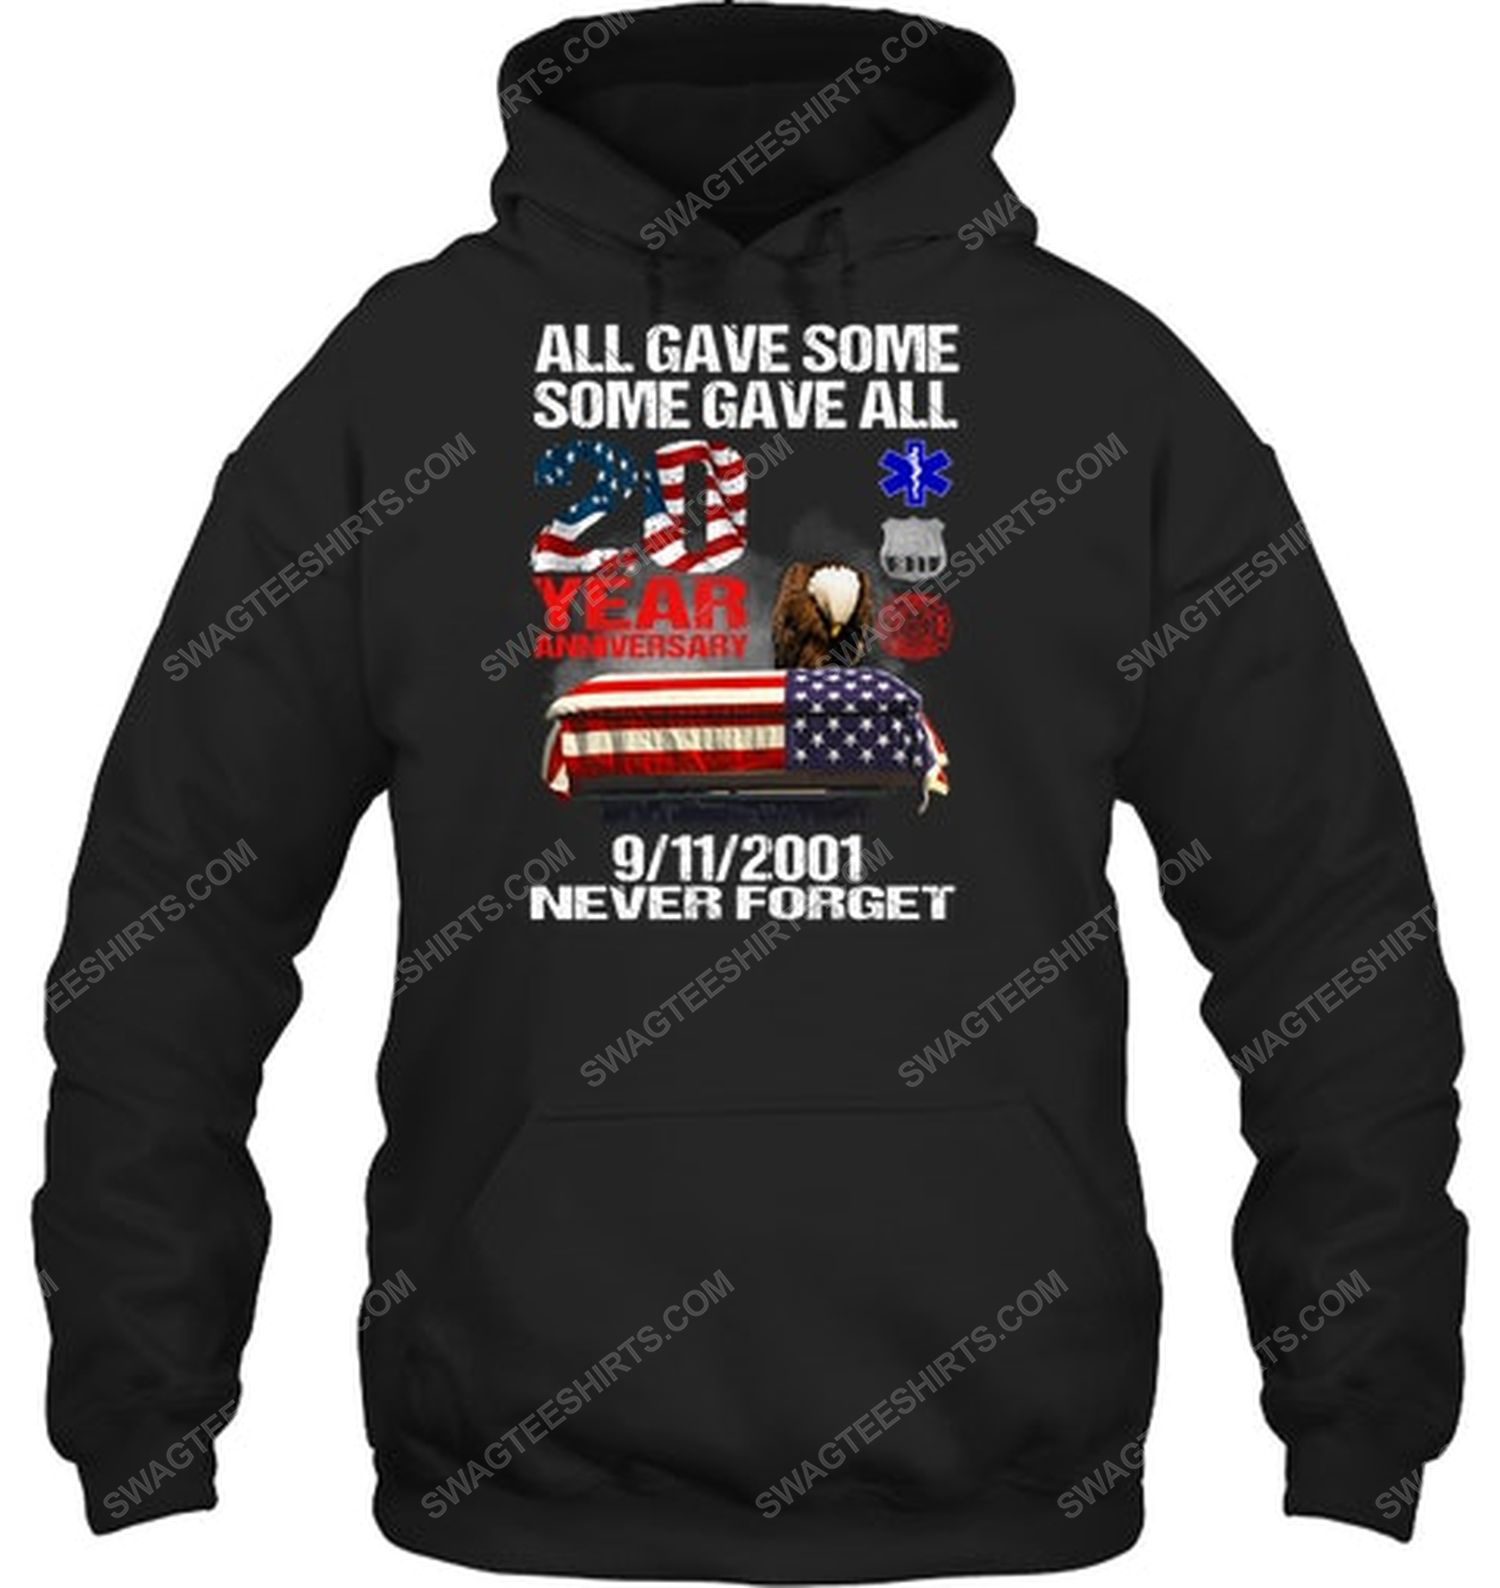 All gave some some gave all 20 year anniversary 9 2001 never forget political hoodie